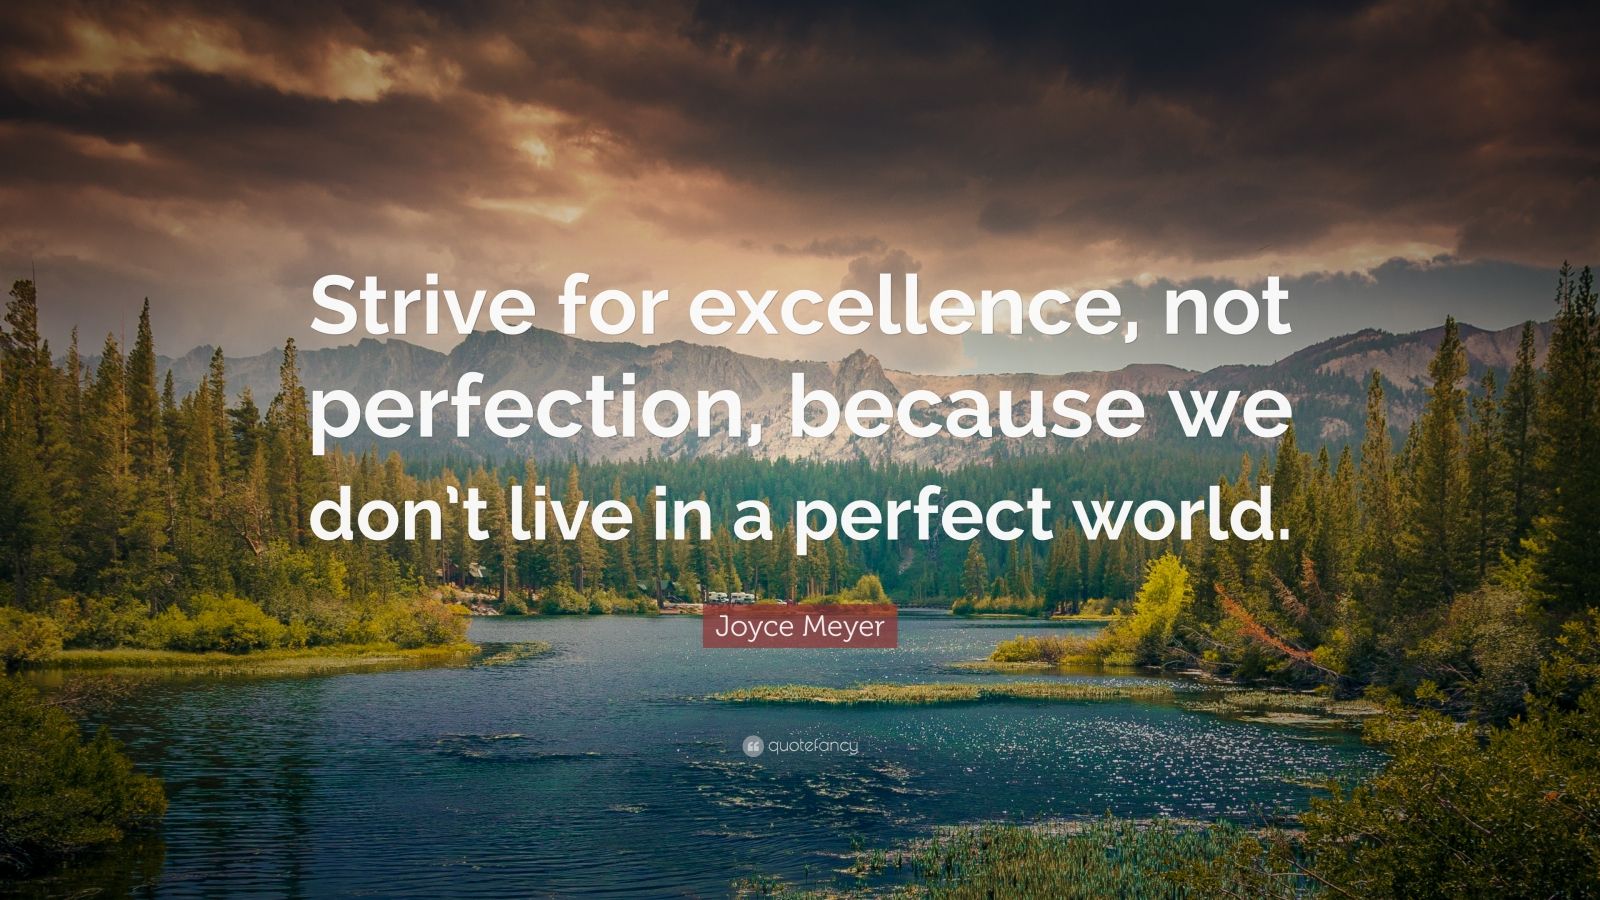 Joyce Meyer Quote: “Strive for excellence, not perfection, because we